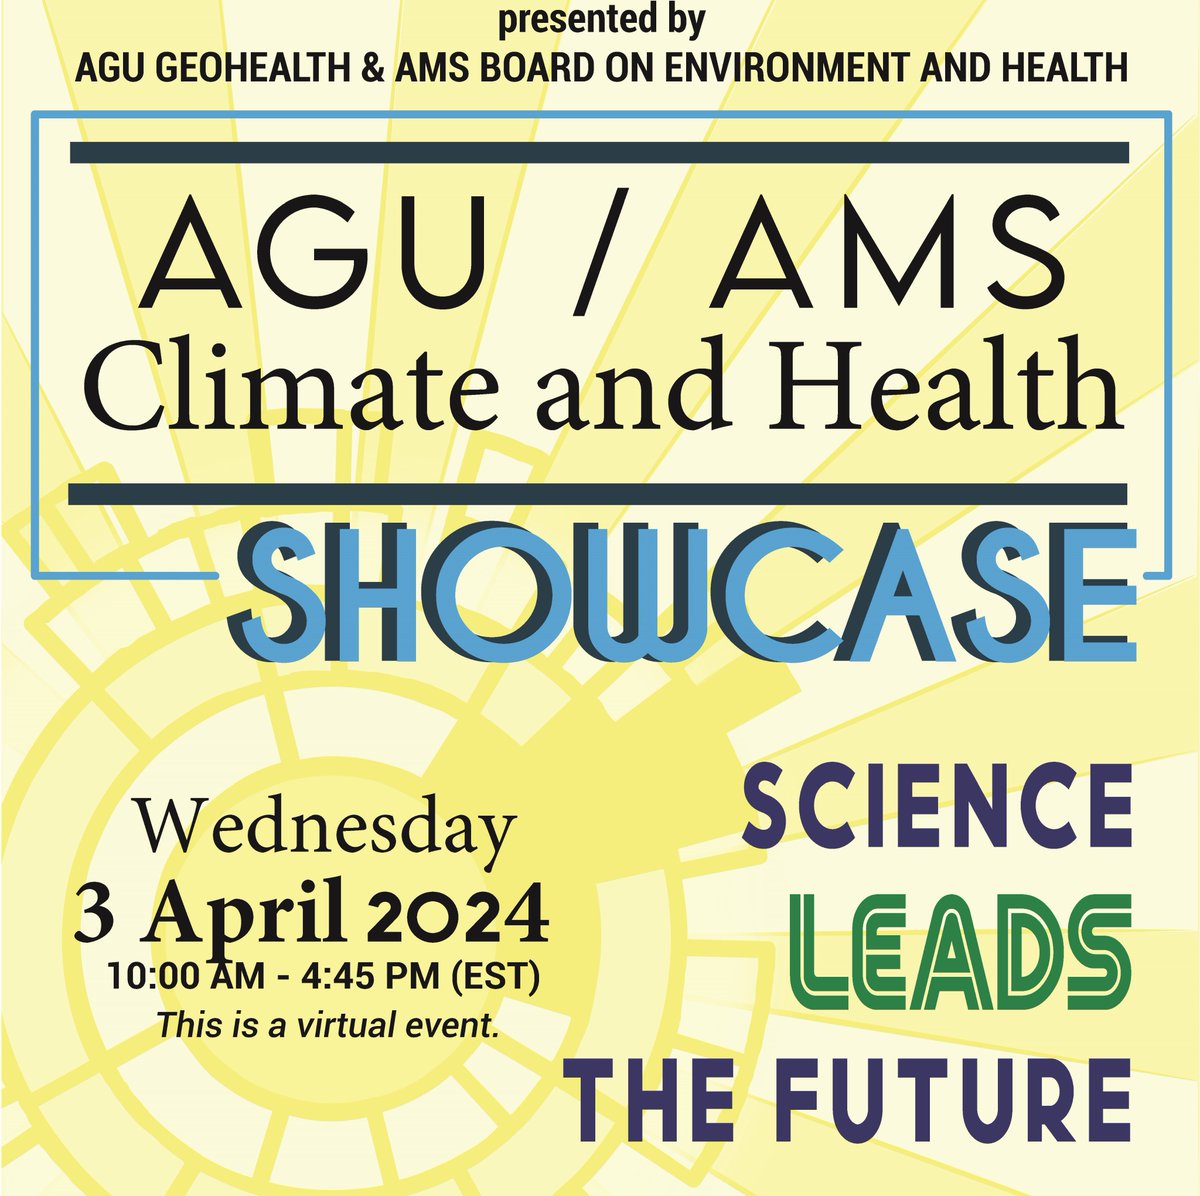 [#GeoHealth Showcase] SAVE THE DATE! On April 3rd, 2024, come join us for the AGU/AMS Climate and Health Showcase! More details to follow. @AMS_Health @AguGeohealth